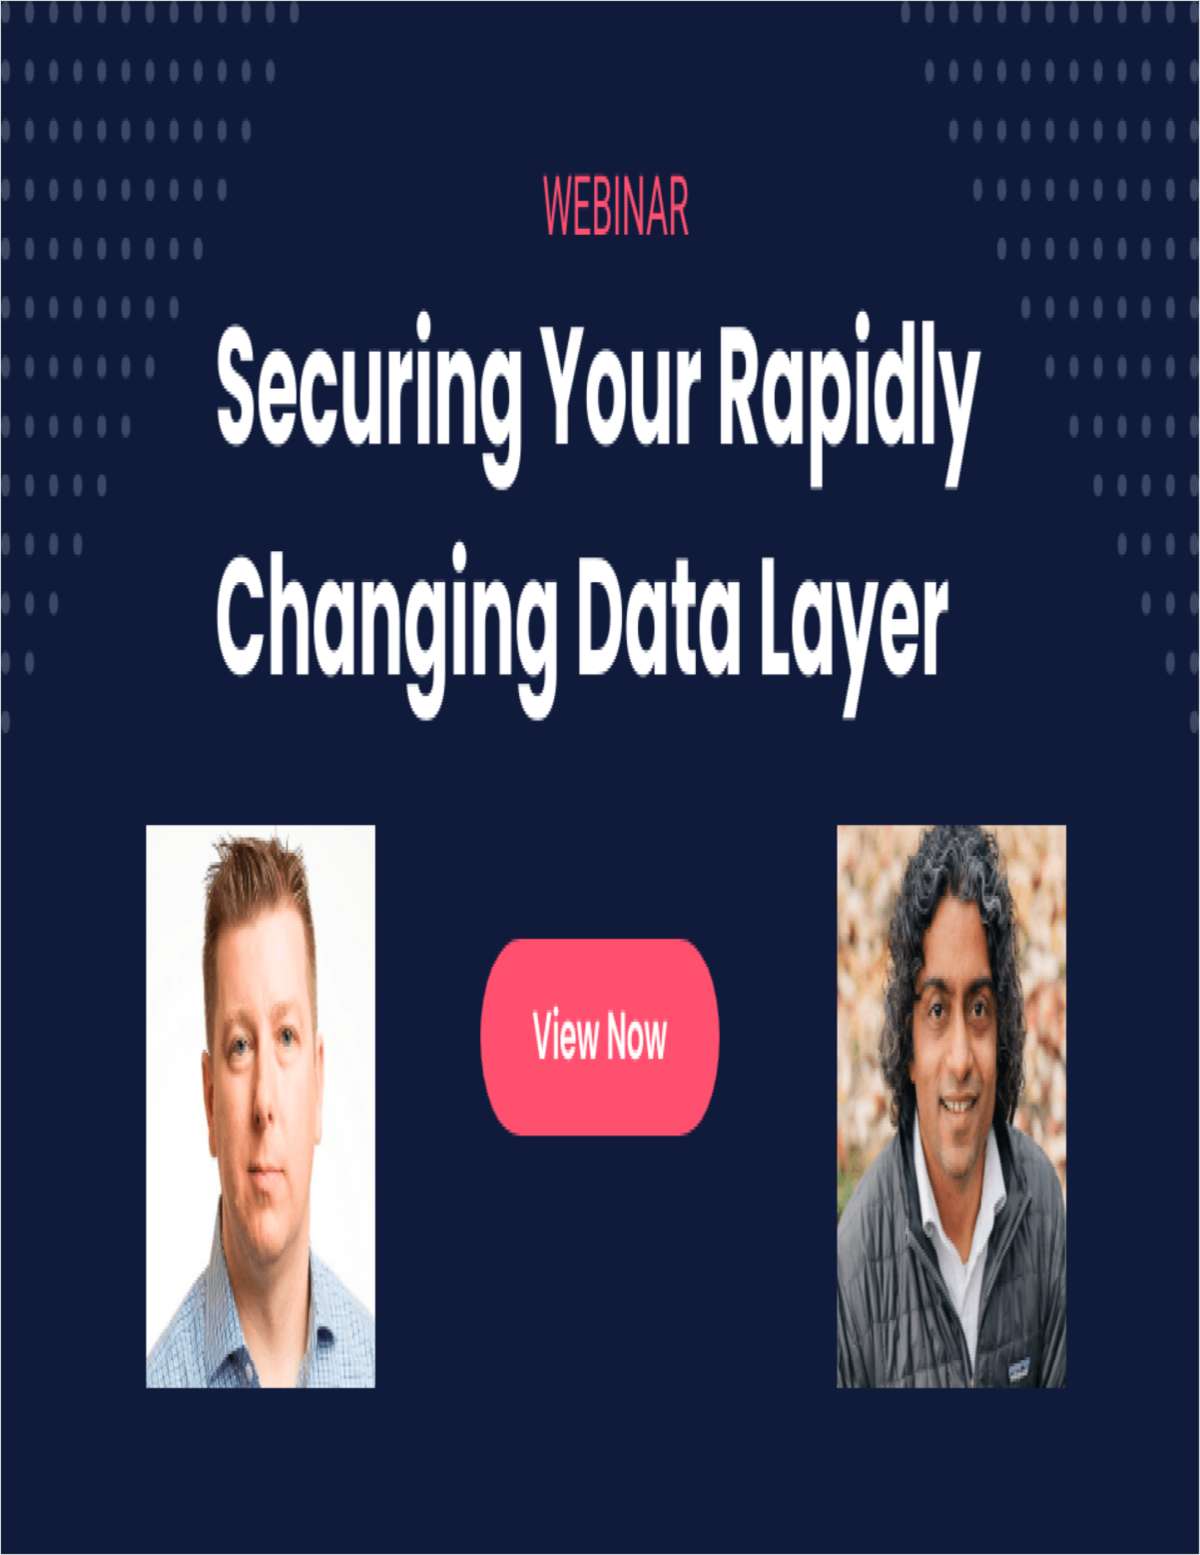 How to Secure Your Rapidly Changing Data Layer 